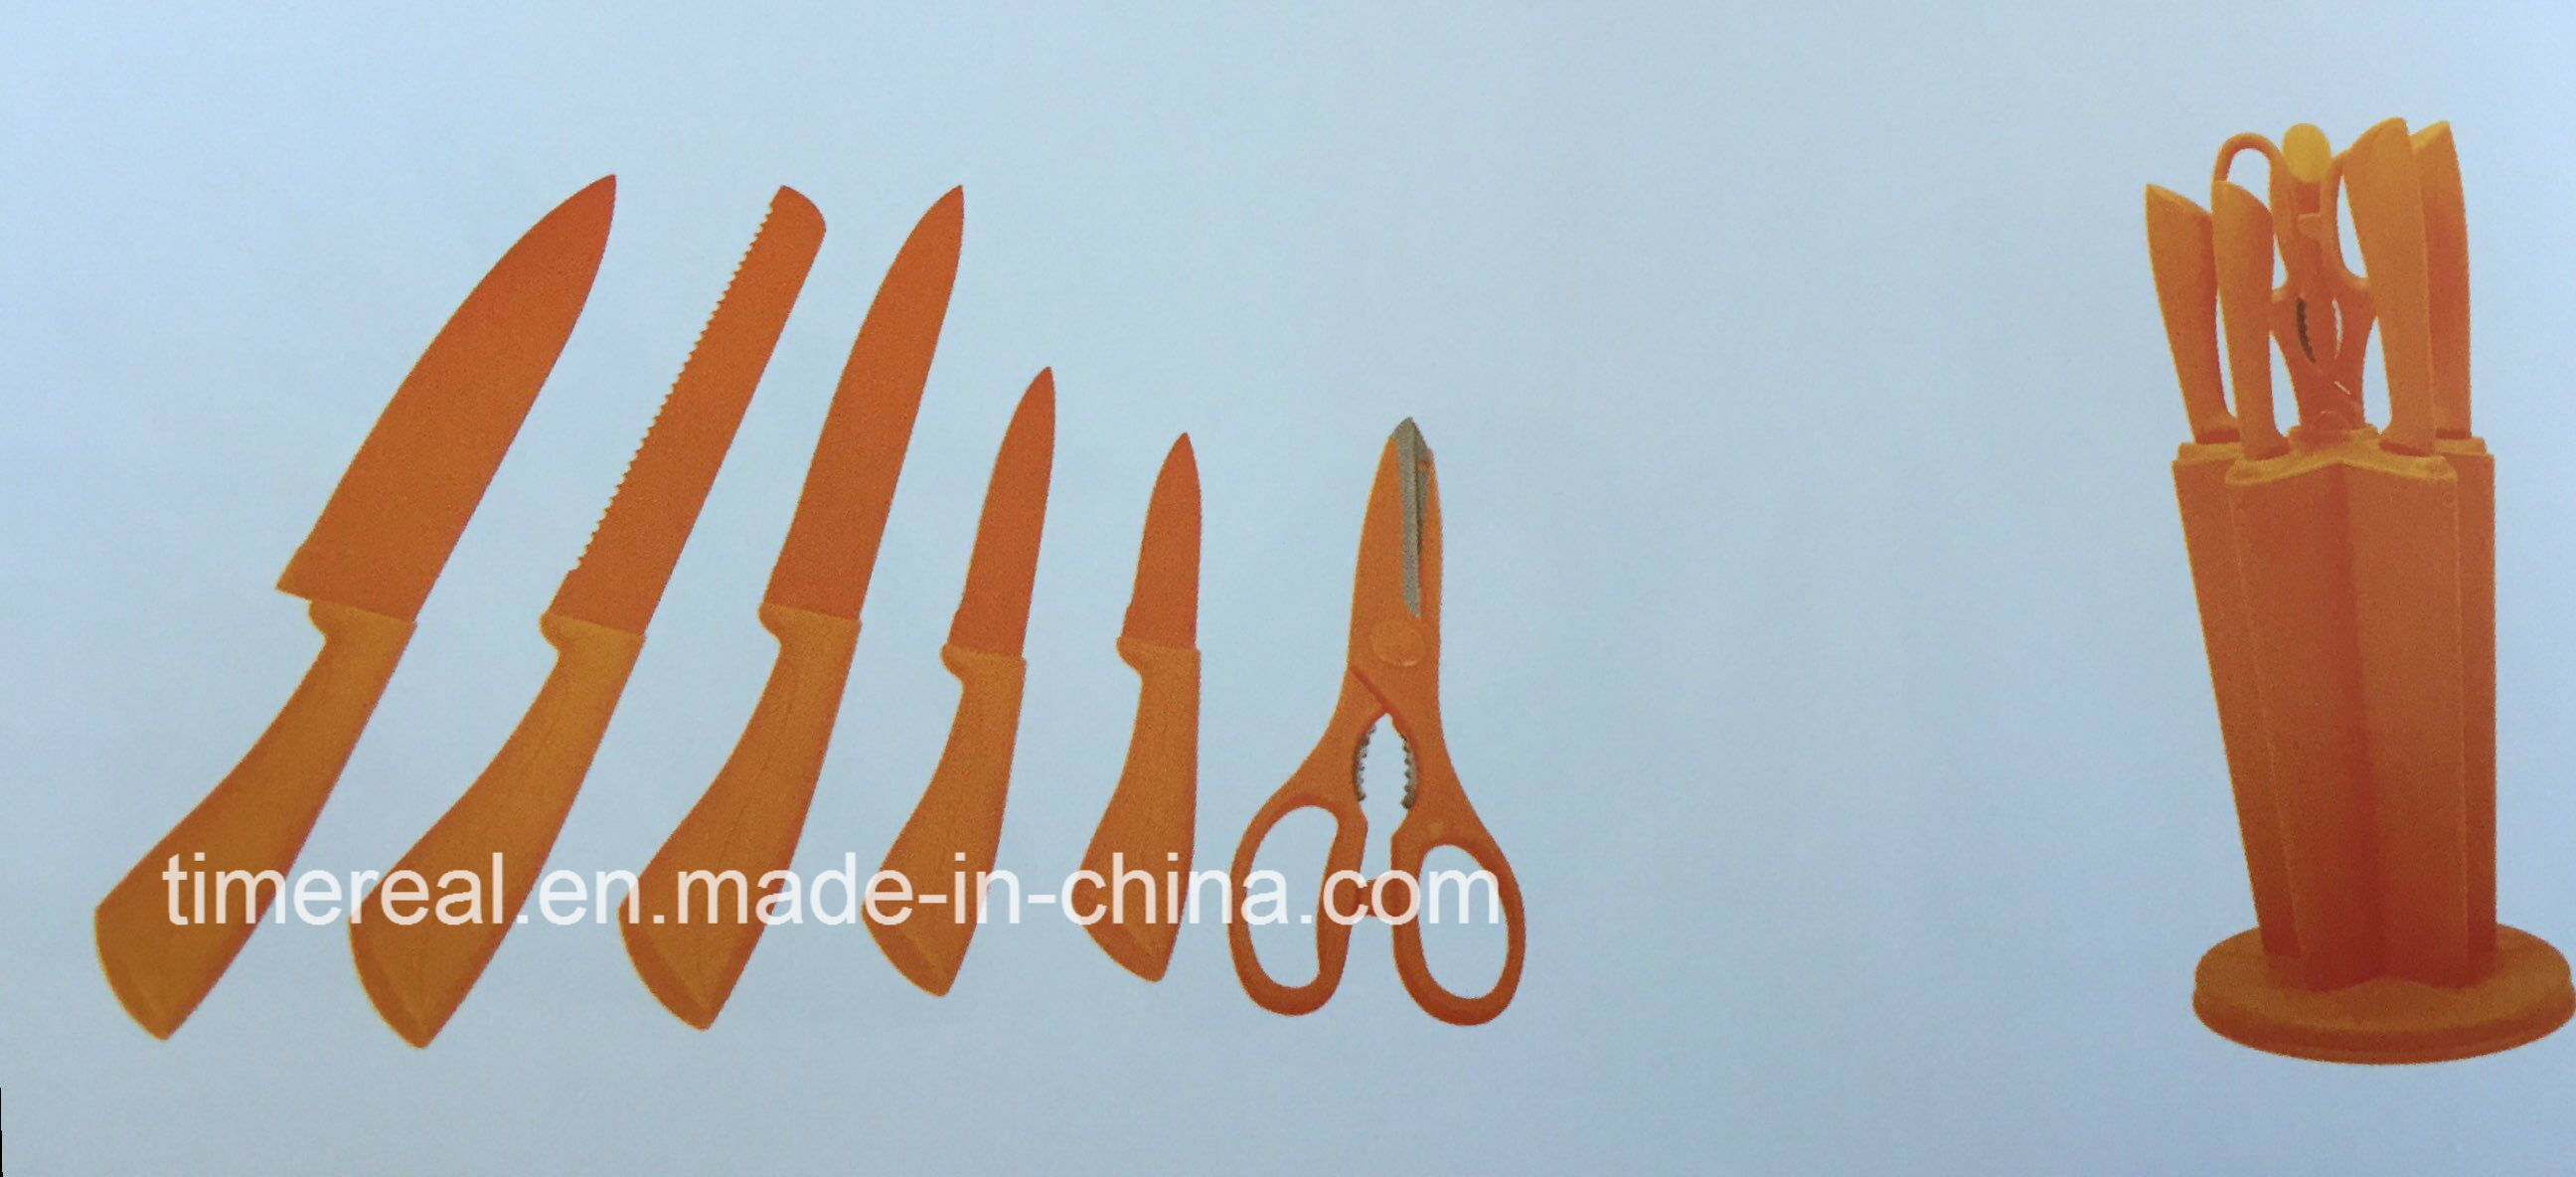 OEM Customized Wheat Straw Kitchenware -
 Stainless Steel Kitchen Knives Set with Painting No. Fj-0043 – Long Prosper